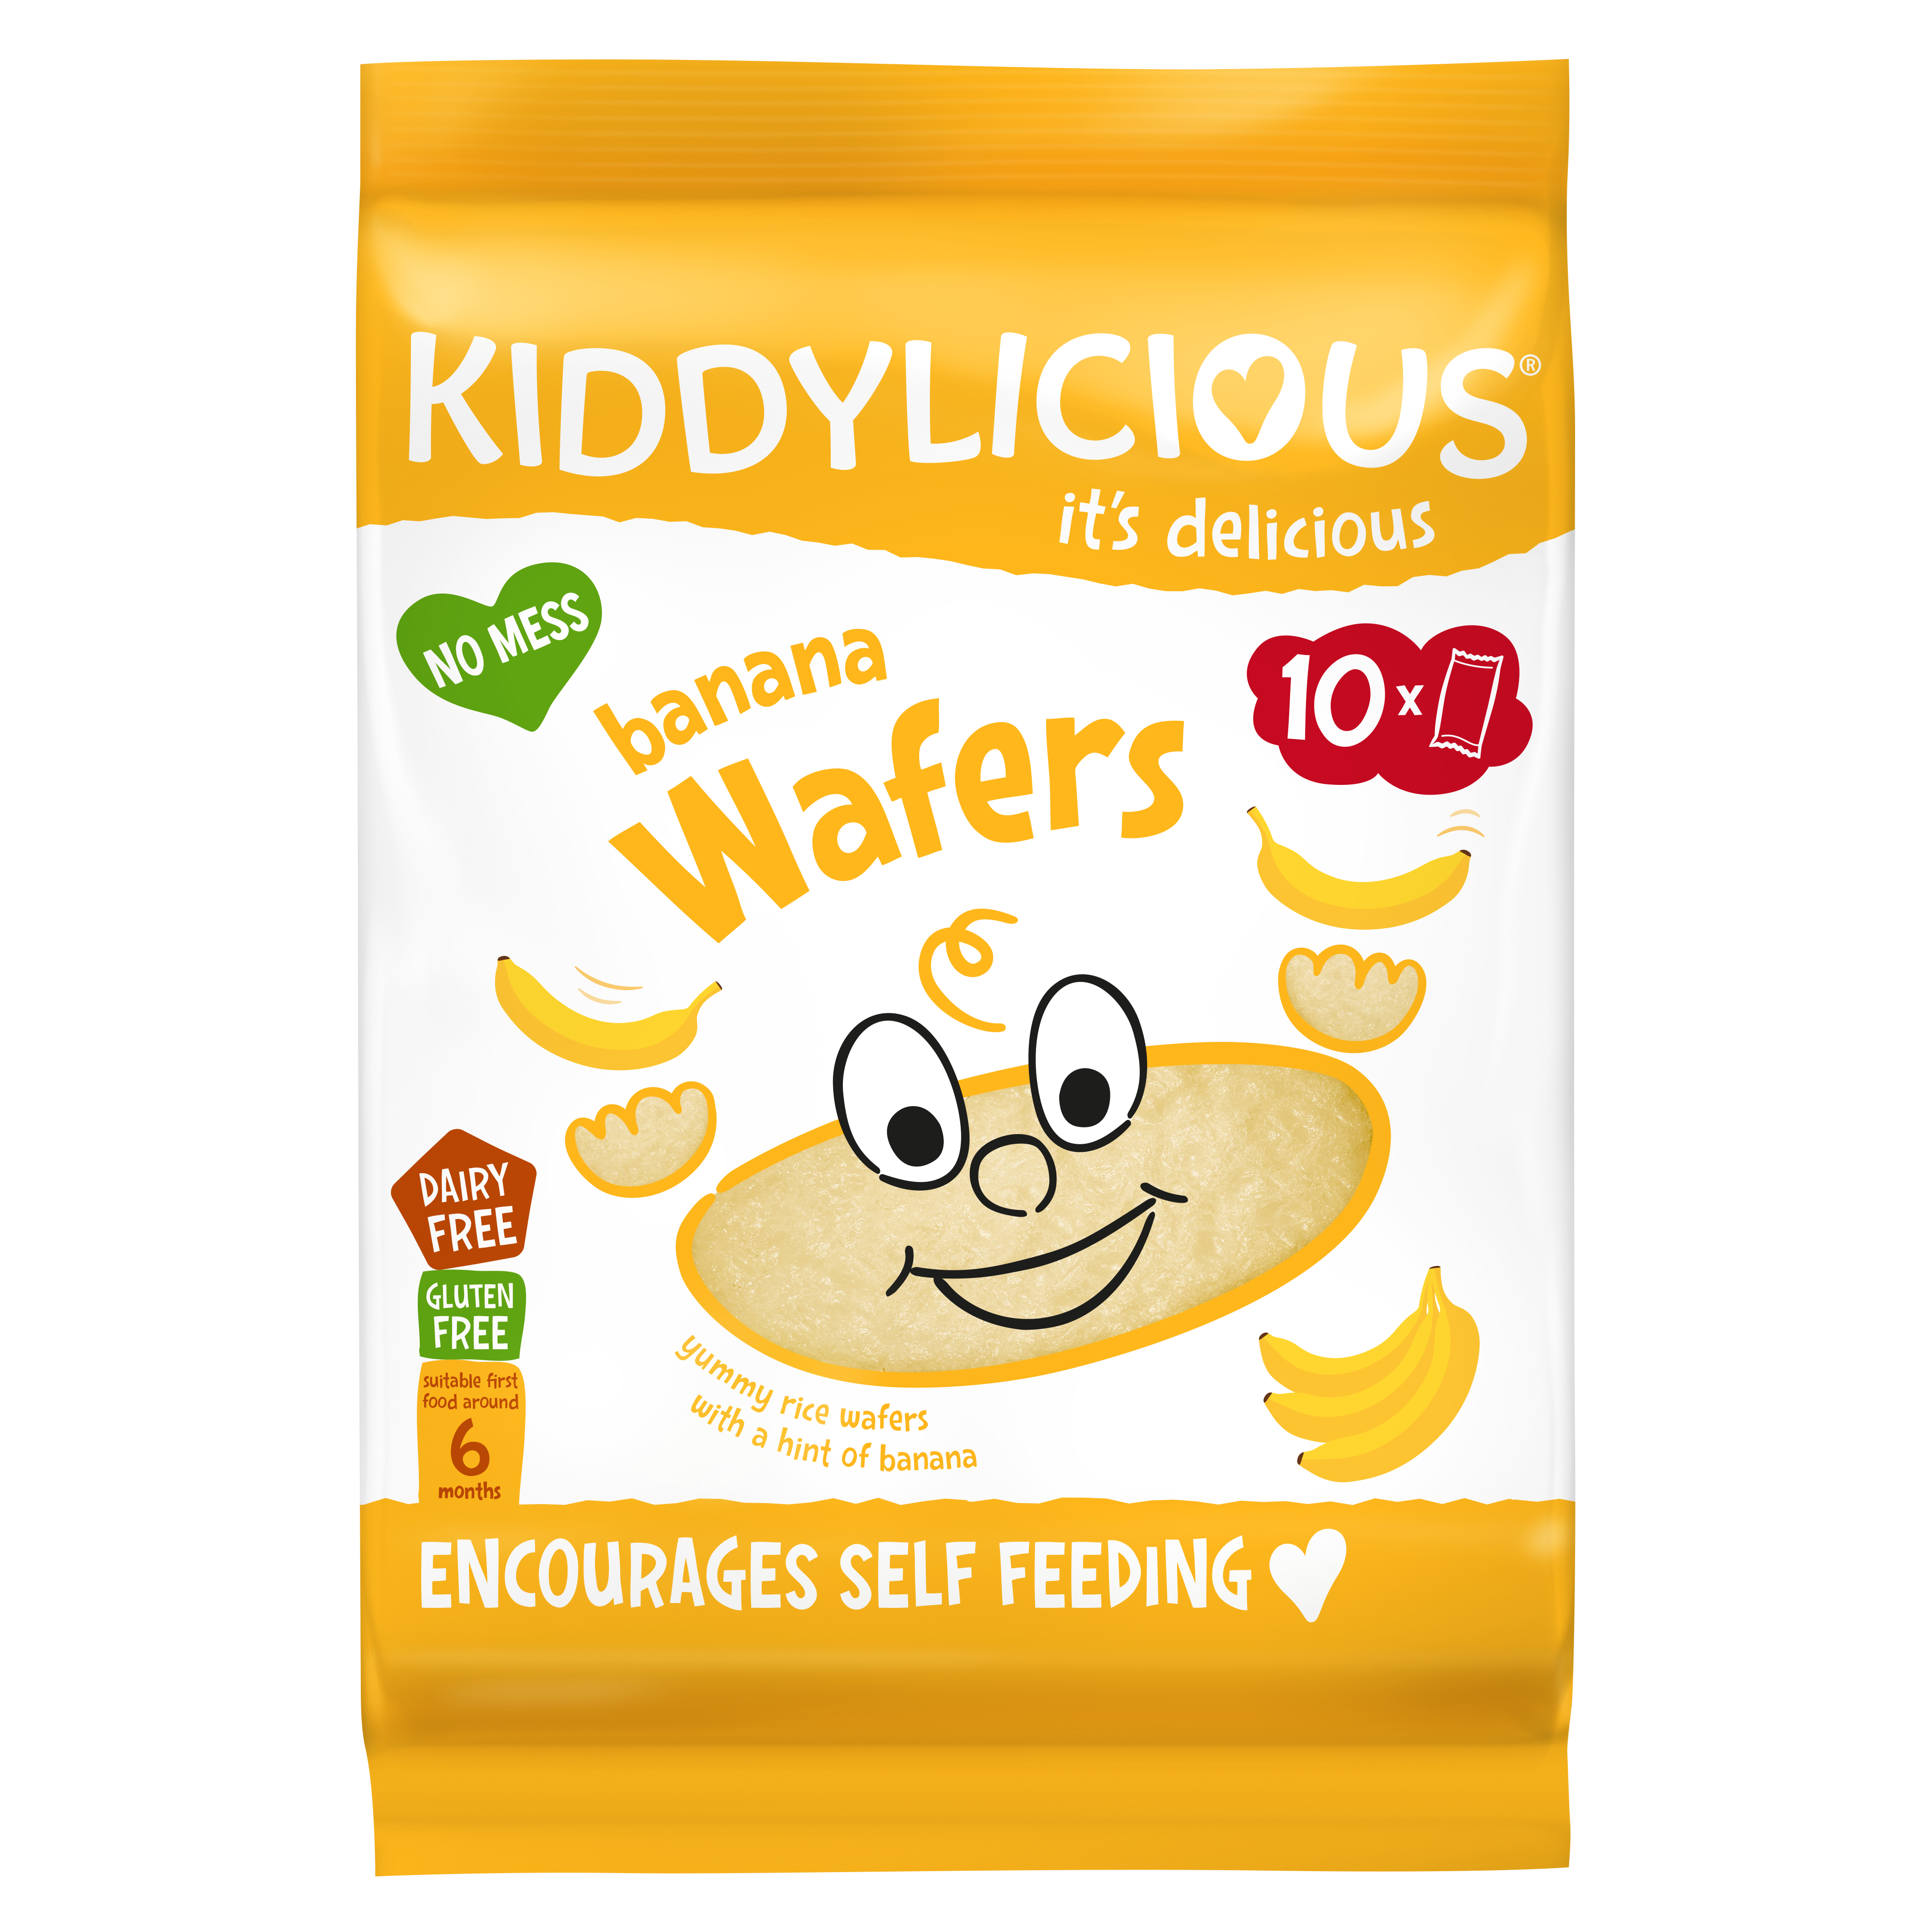 Products - Kiddylicious